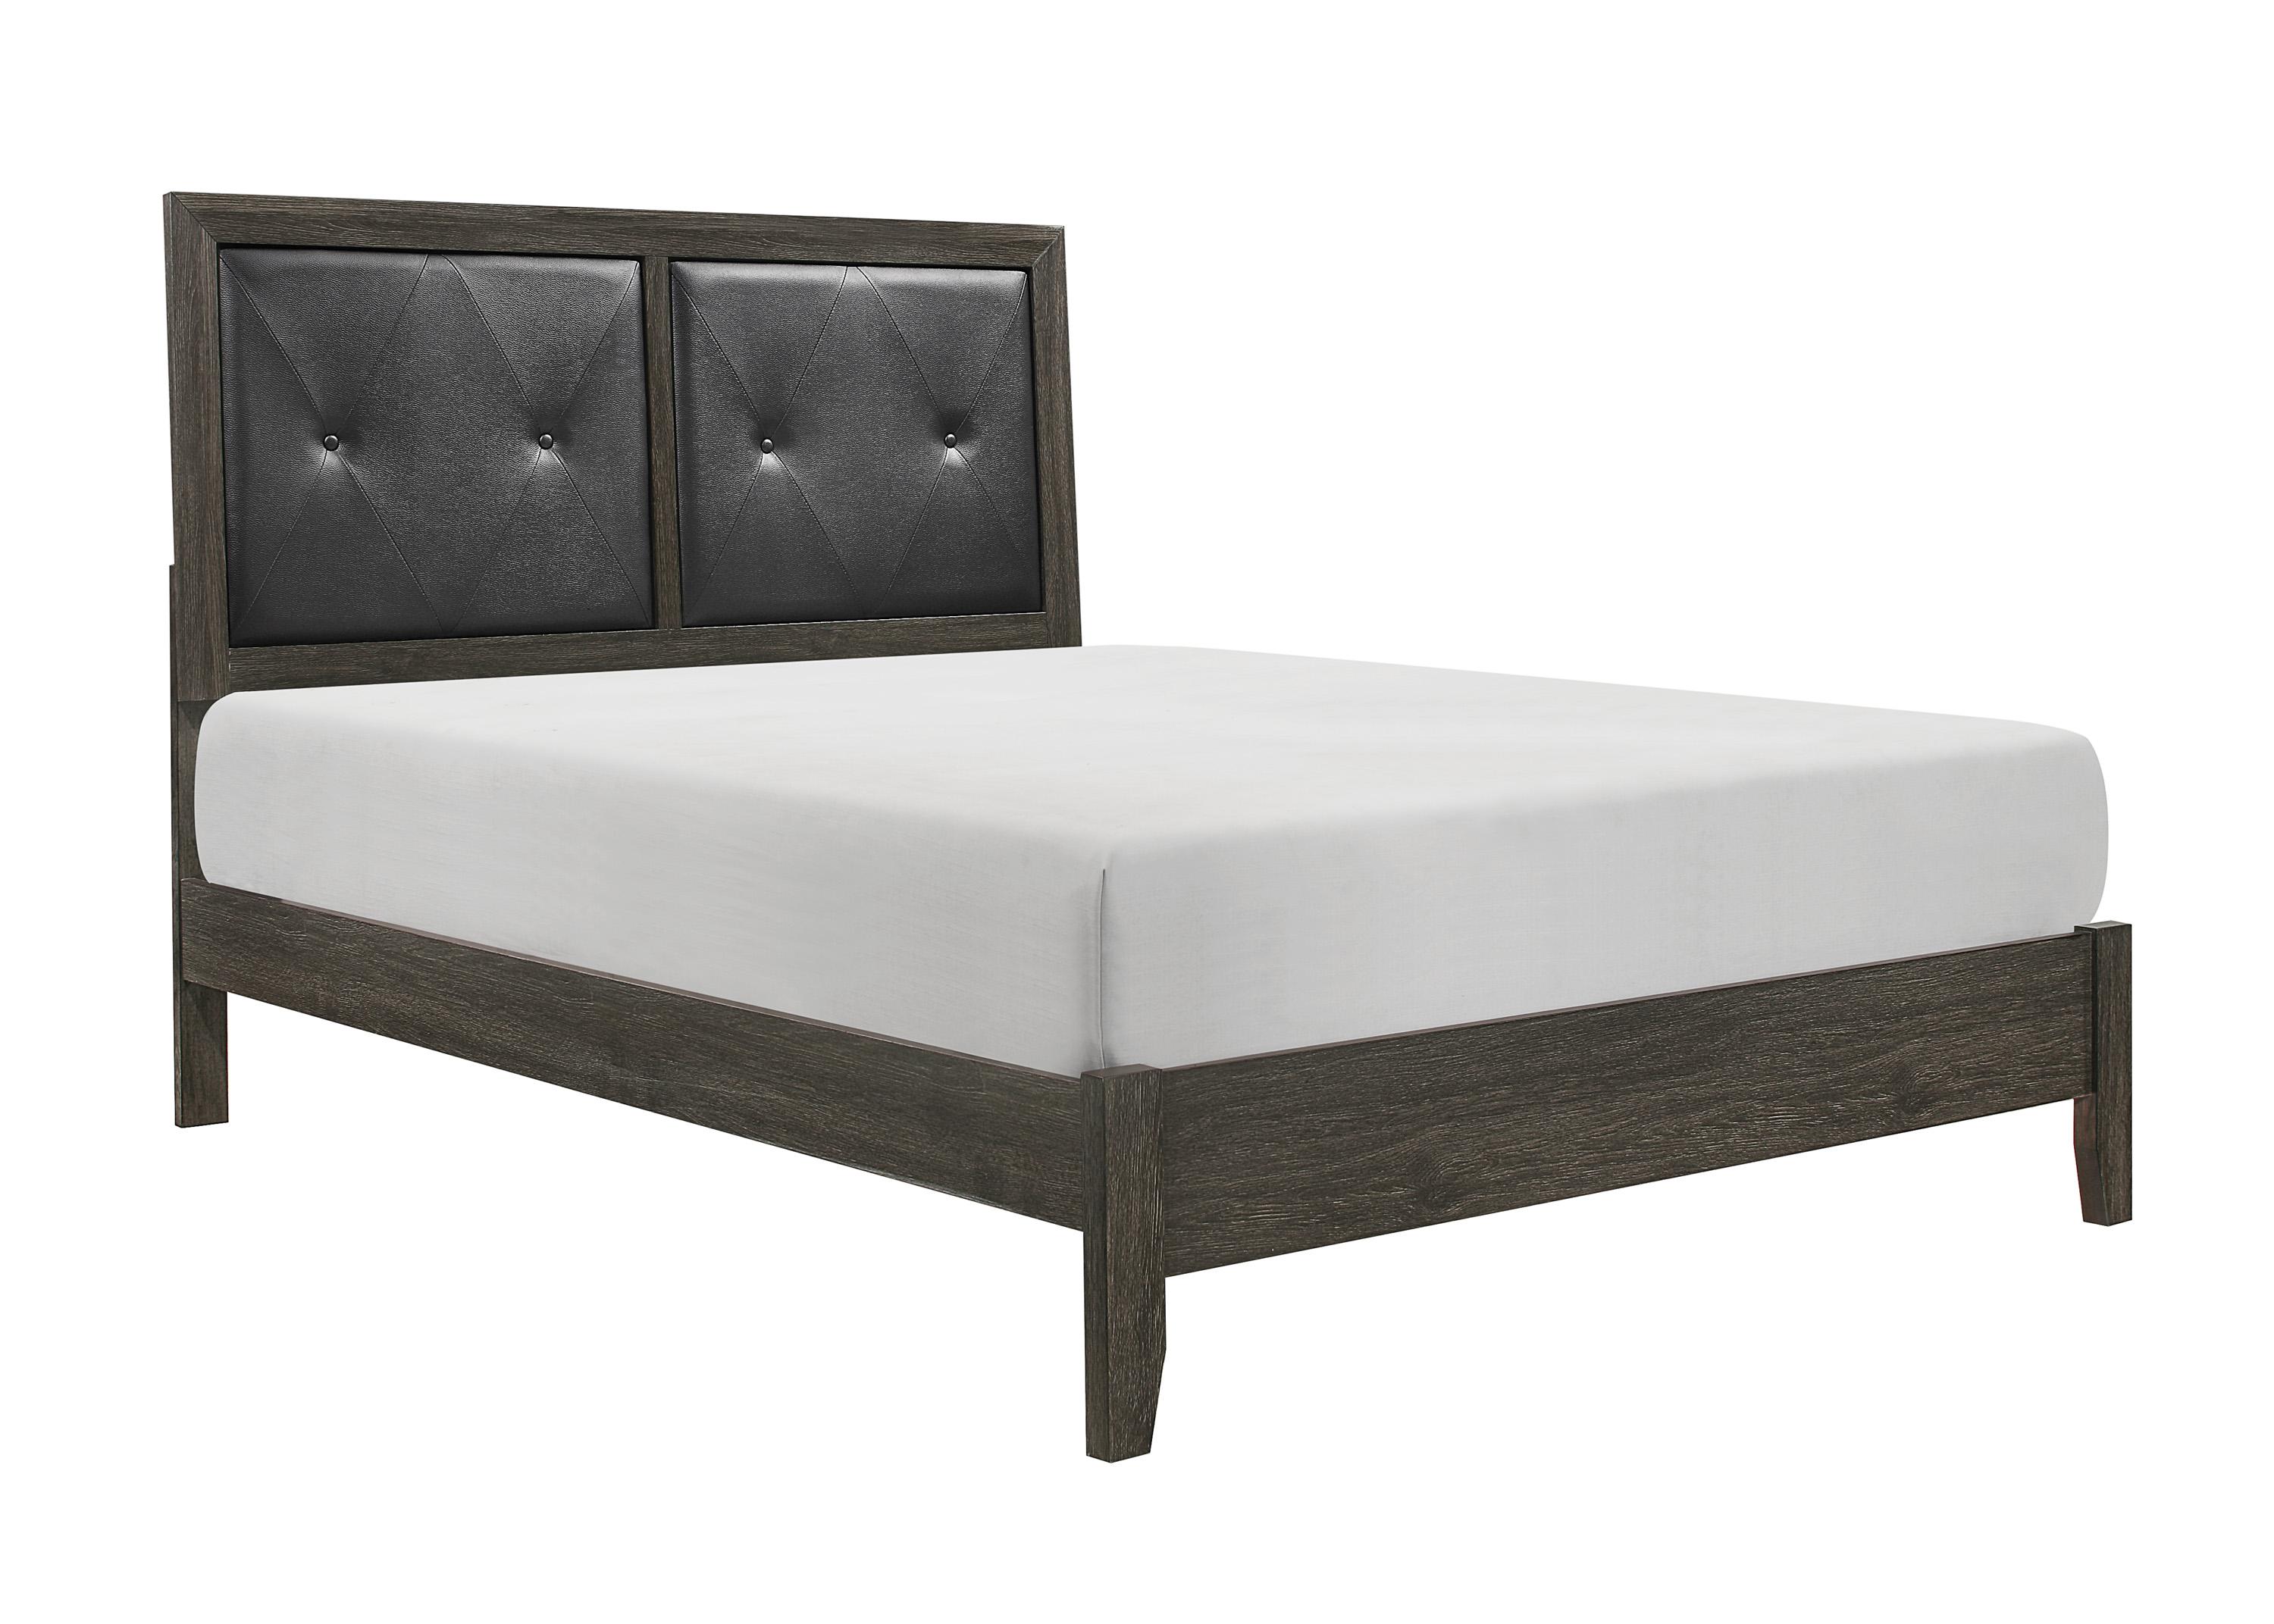 Contemporary Bed 2145KNP-1CK* Edina 2145KNP-1CK* in Dark Gray Faux Leather